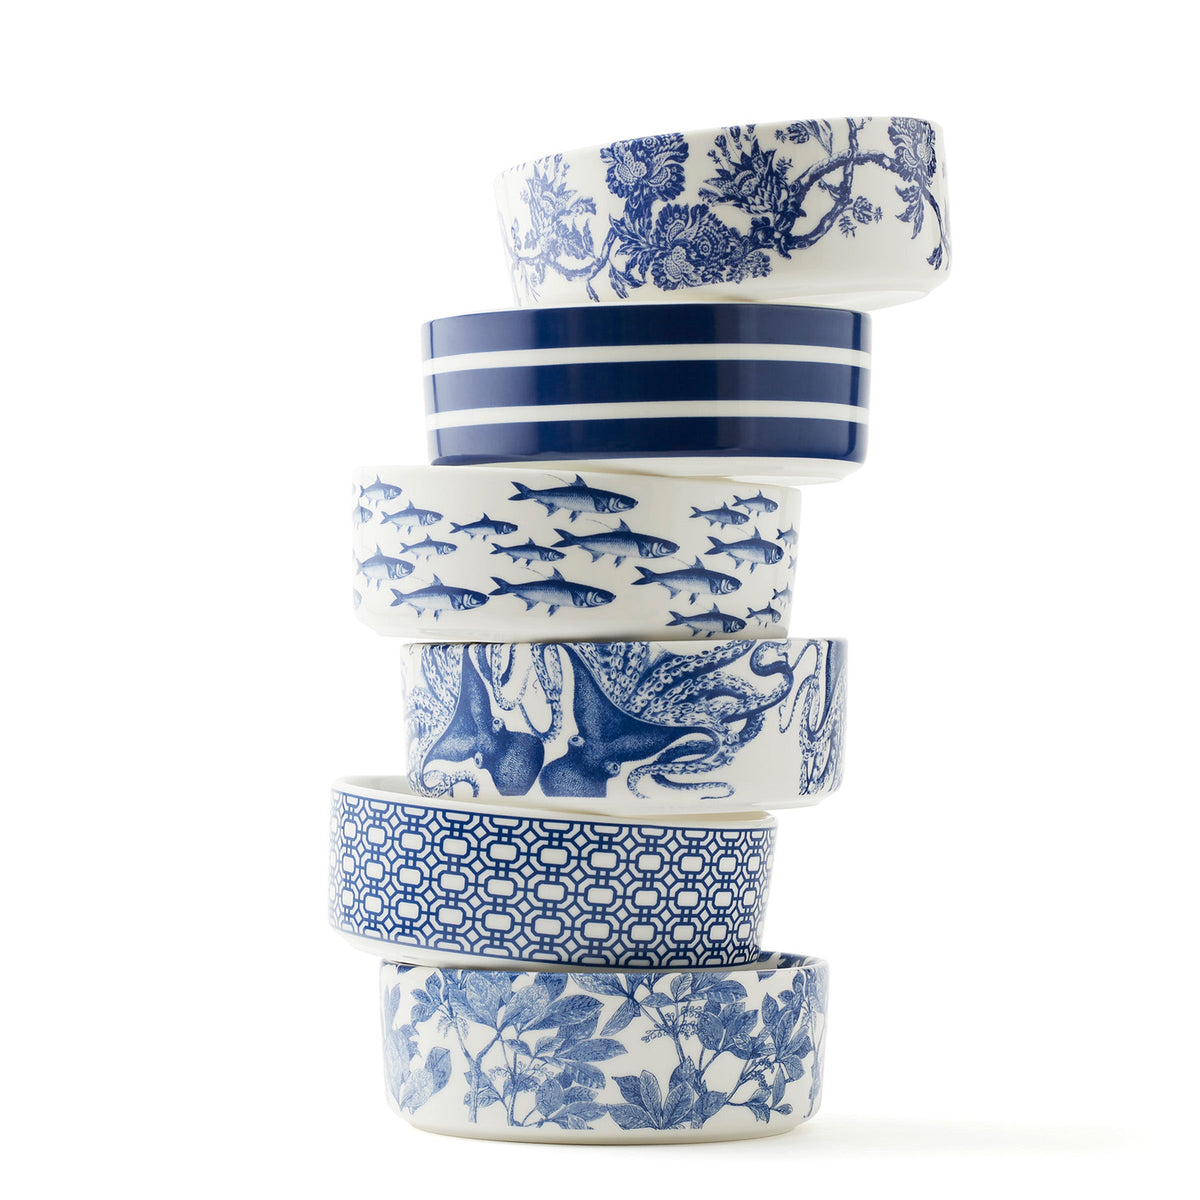 A stack of Caskata Lucy Medium Pet Bowls in blue and white.